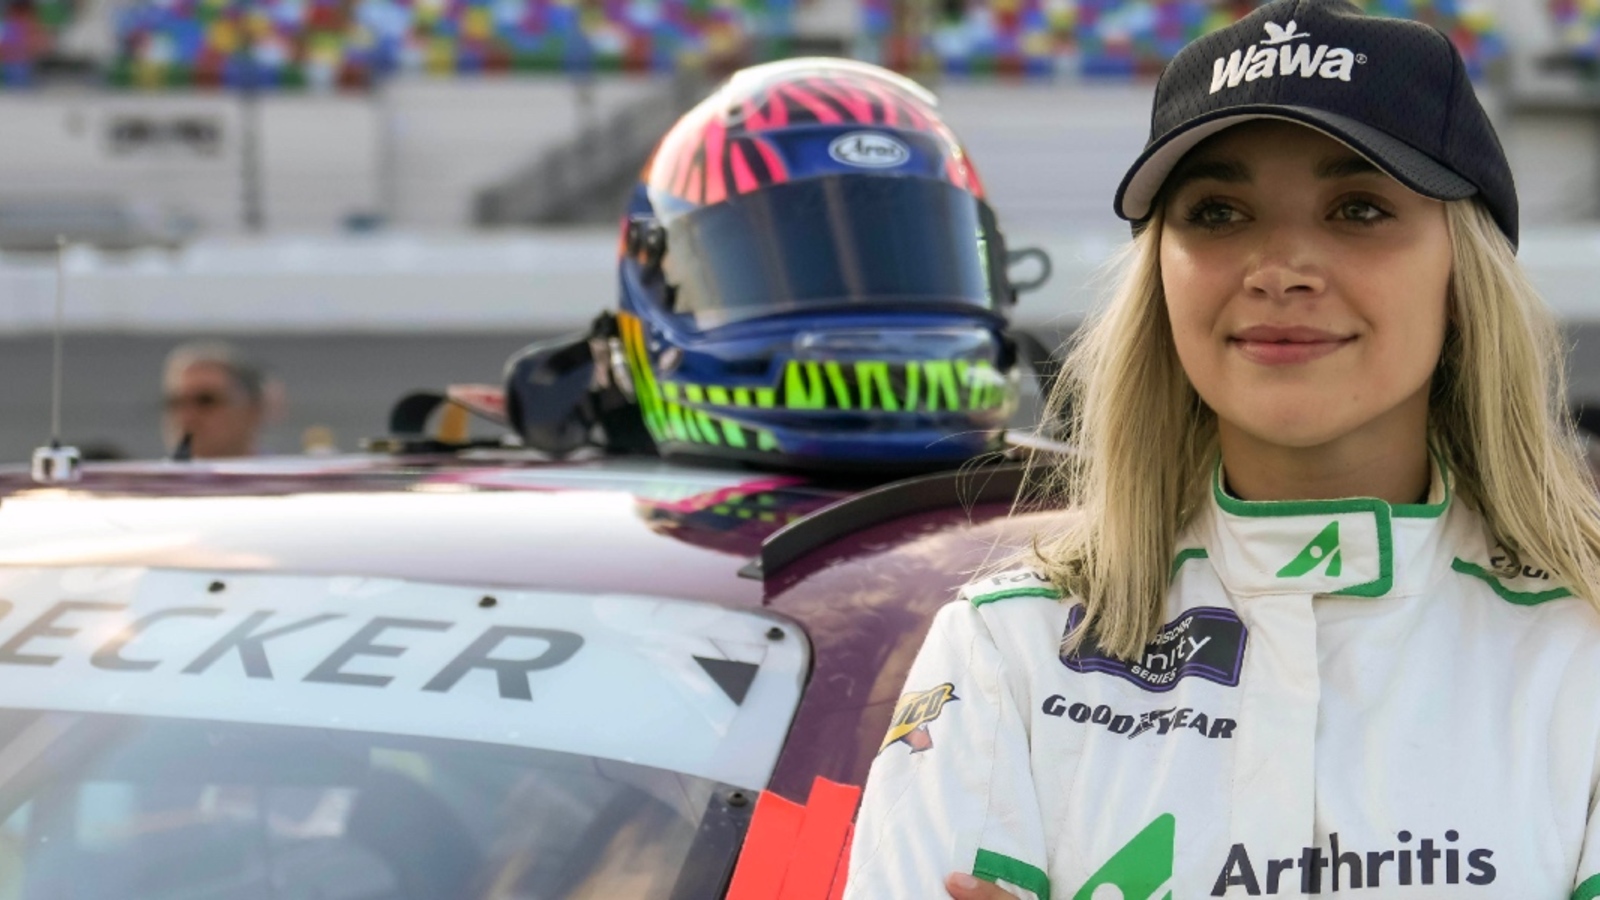 Natalie Decker becomes first woman to lead Xfinity Series race since Danica Patrick in 2013